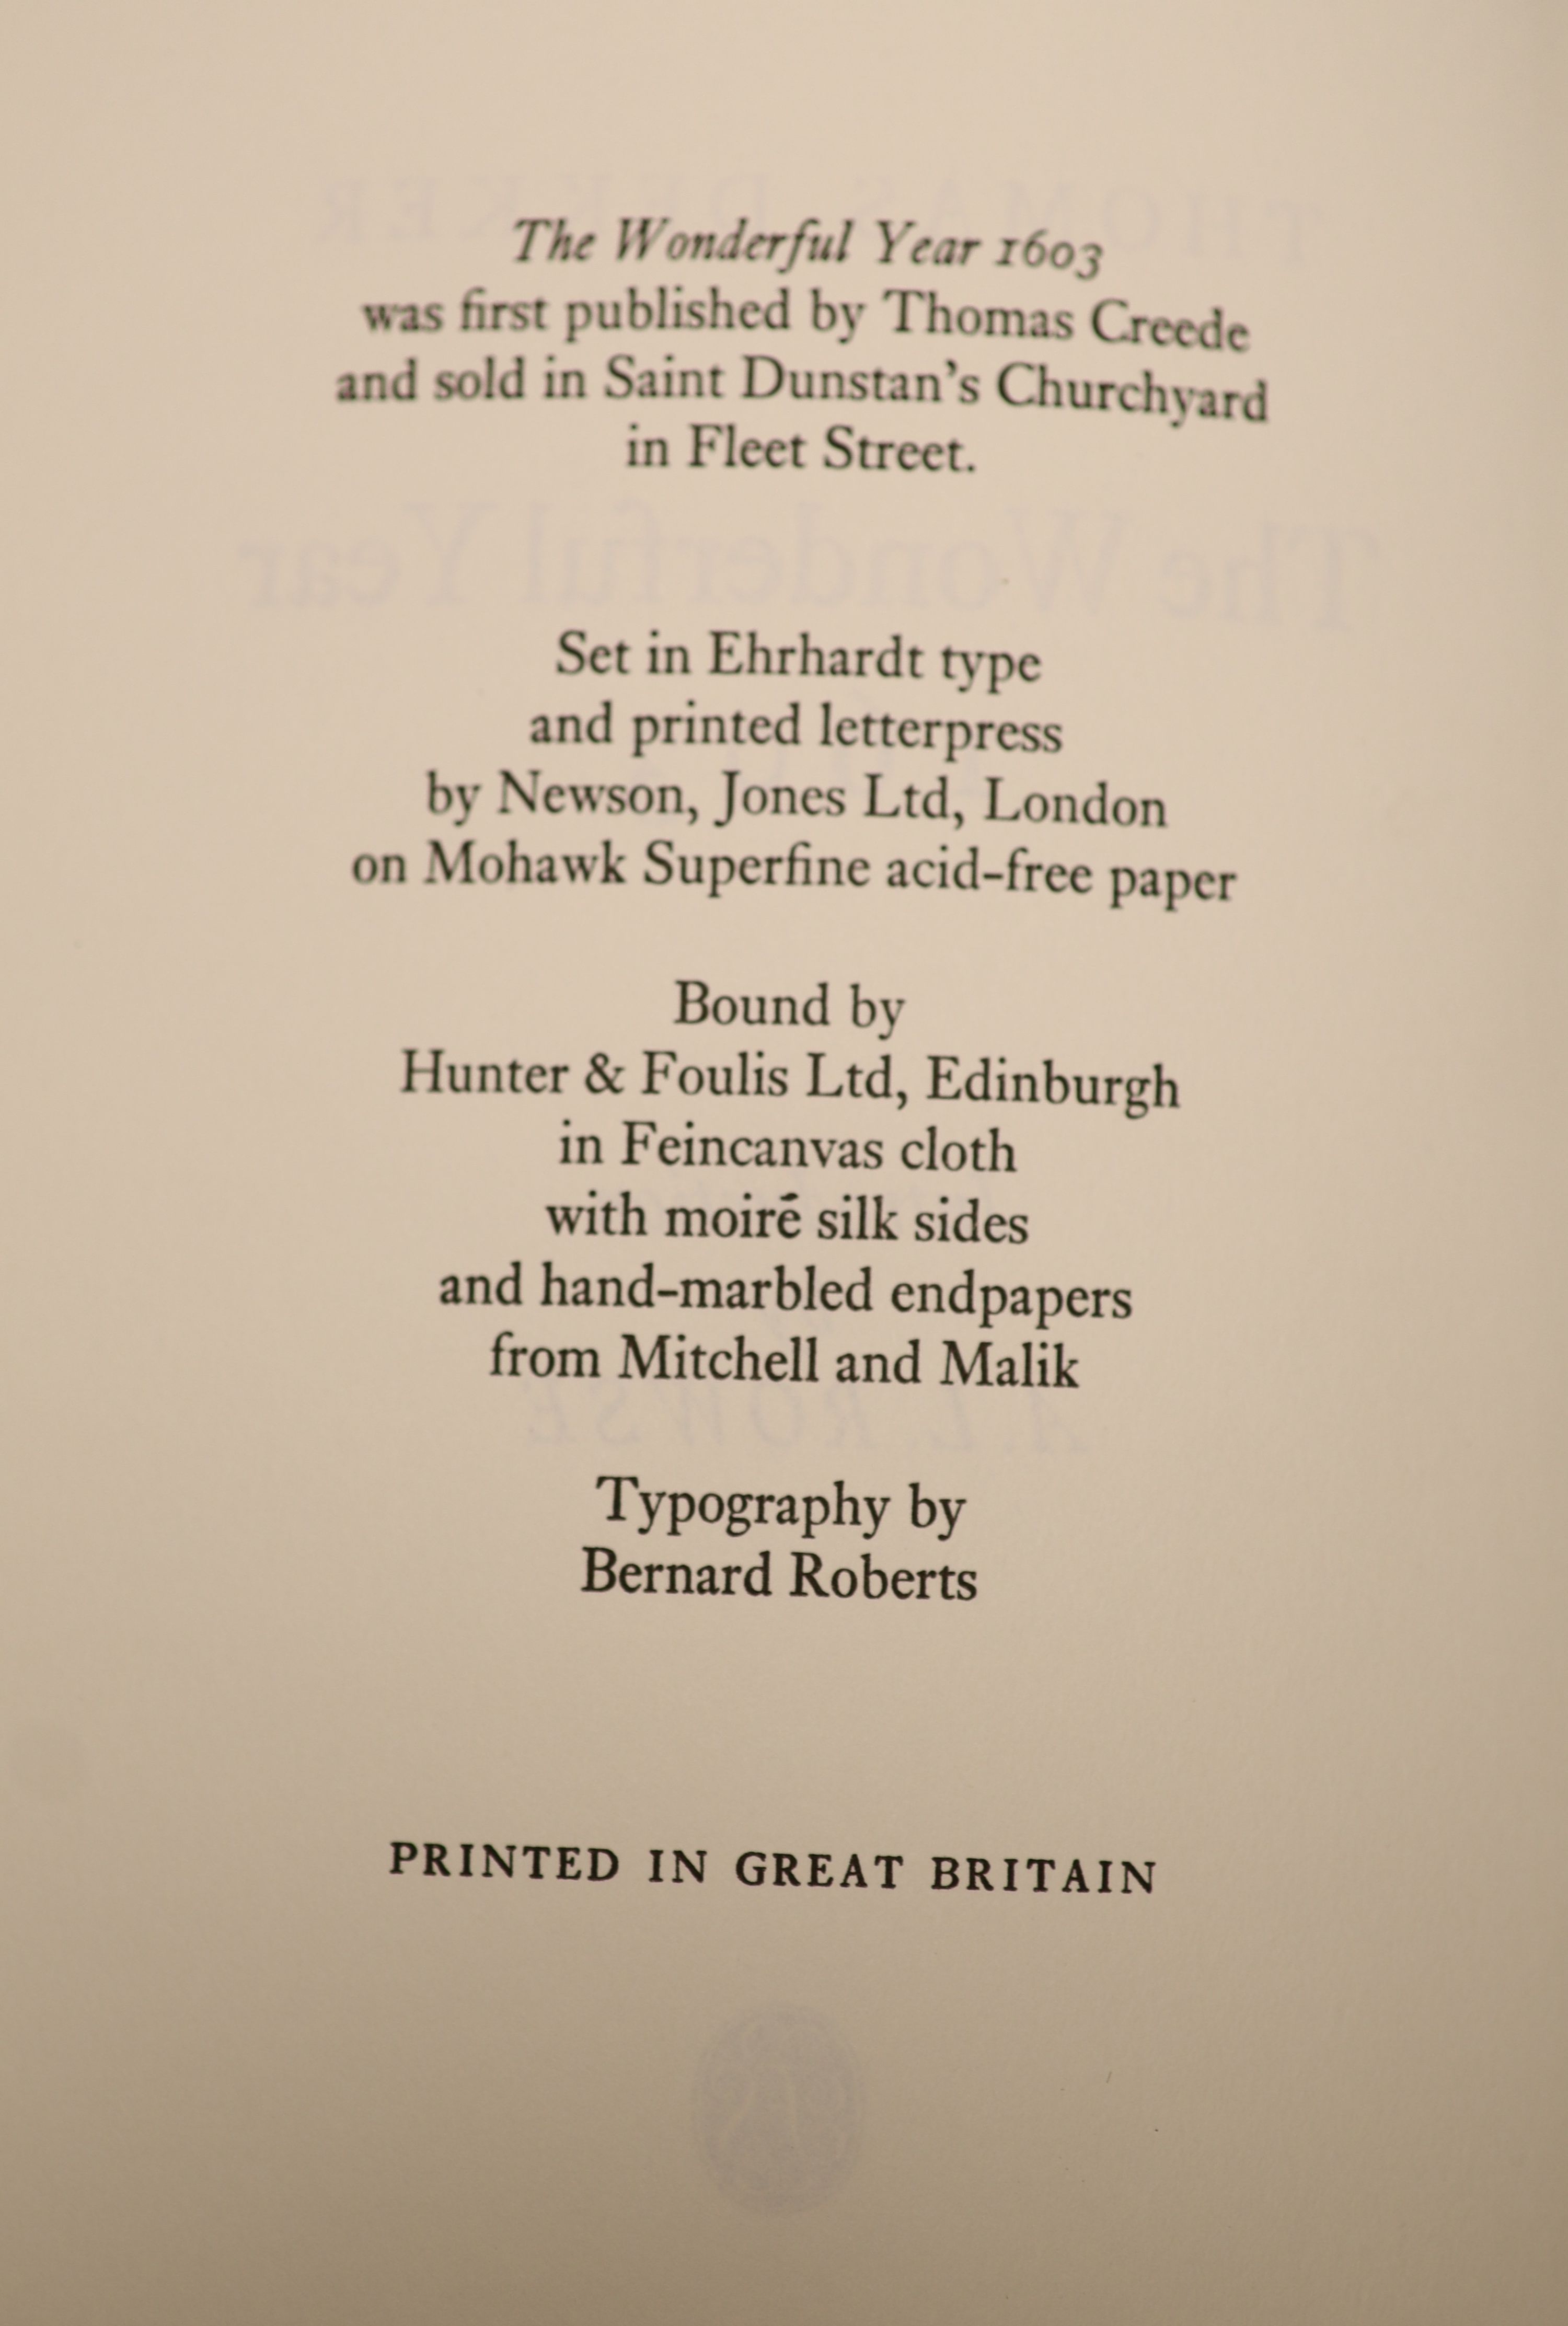 Wilmot, John, The Earl of Rochester, Perfect and Imperfect Enjoyments: Poems, quarter bound in leather with marbled boards, in a presentation box, Folio Society limited edition (edition number listed as ‘B.B’) together w